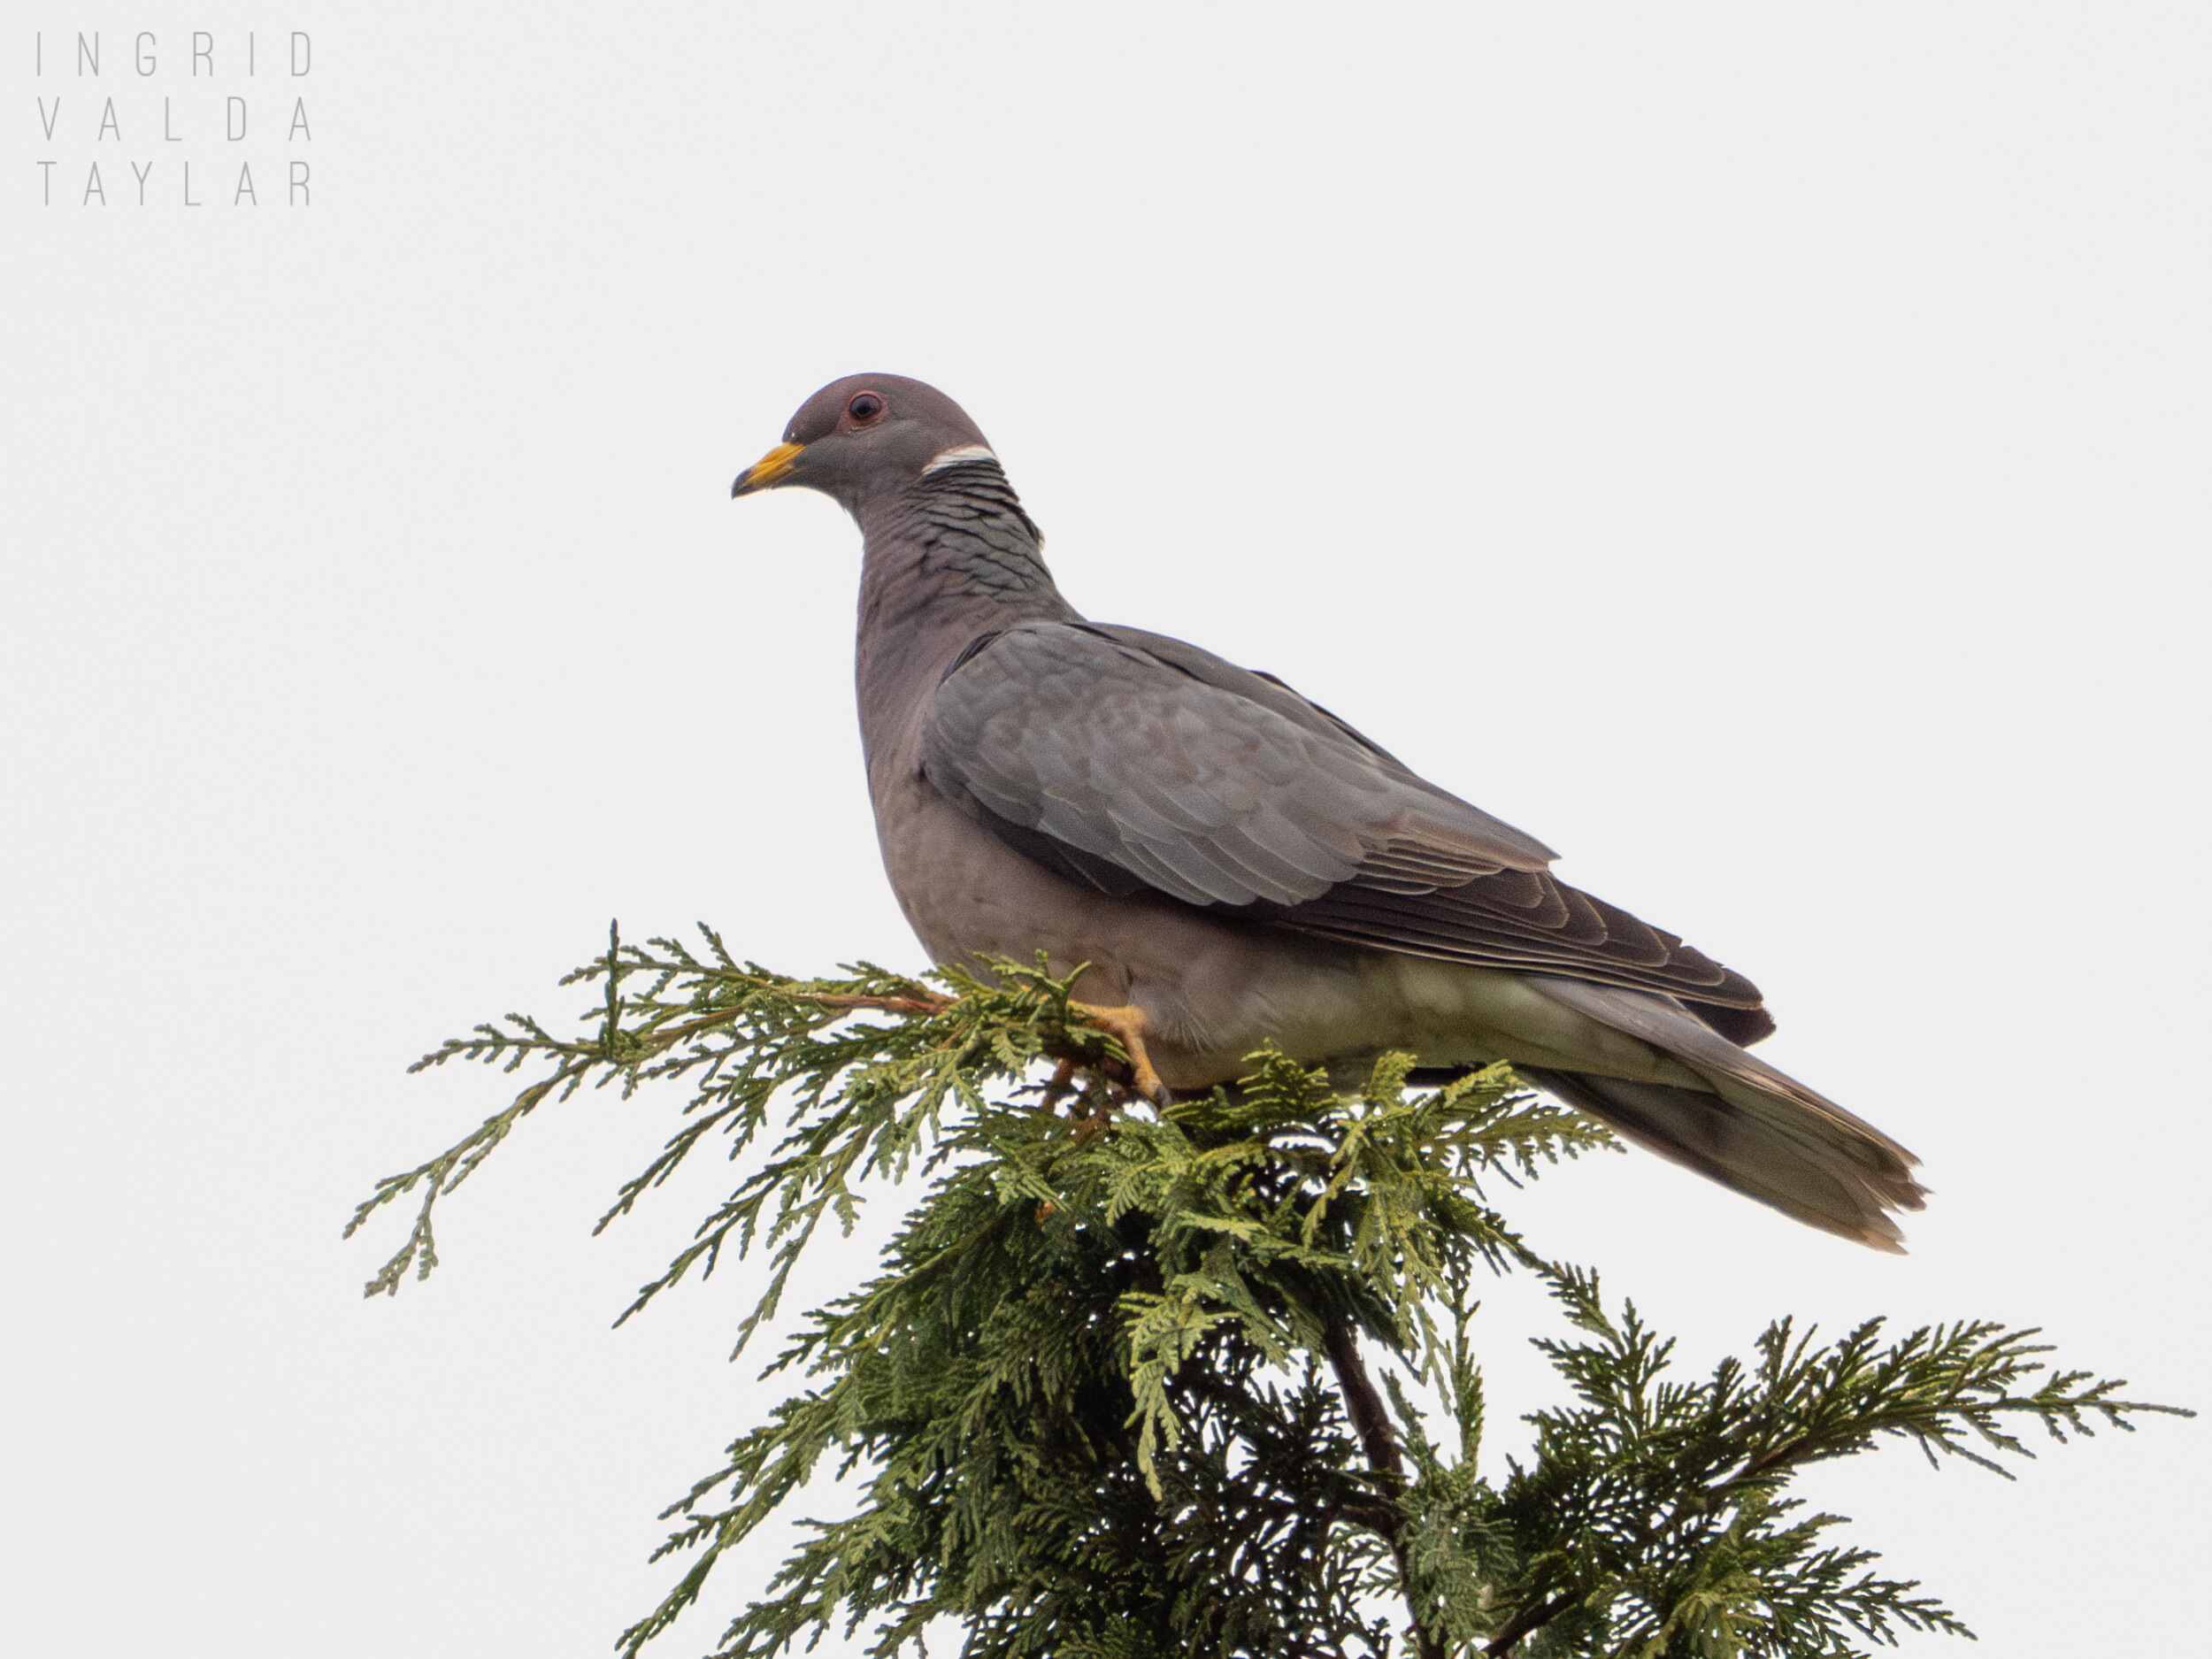 Band-Tailed Pigeon on Tree Top